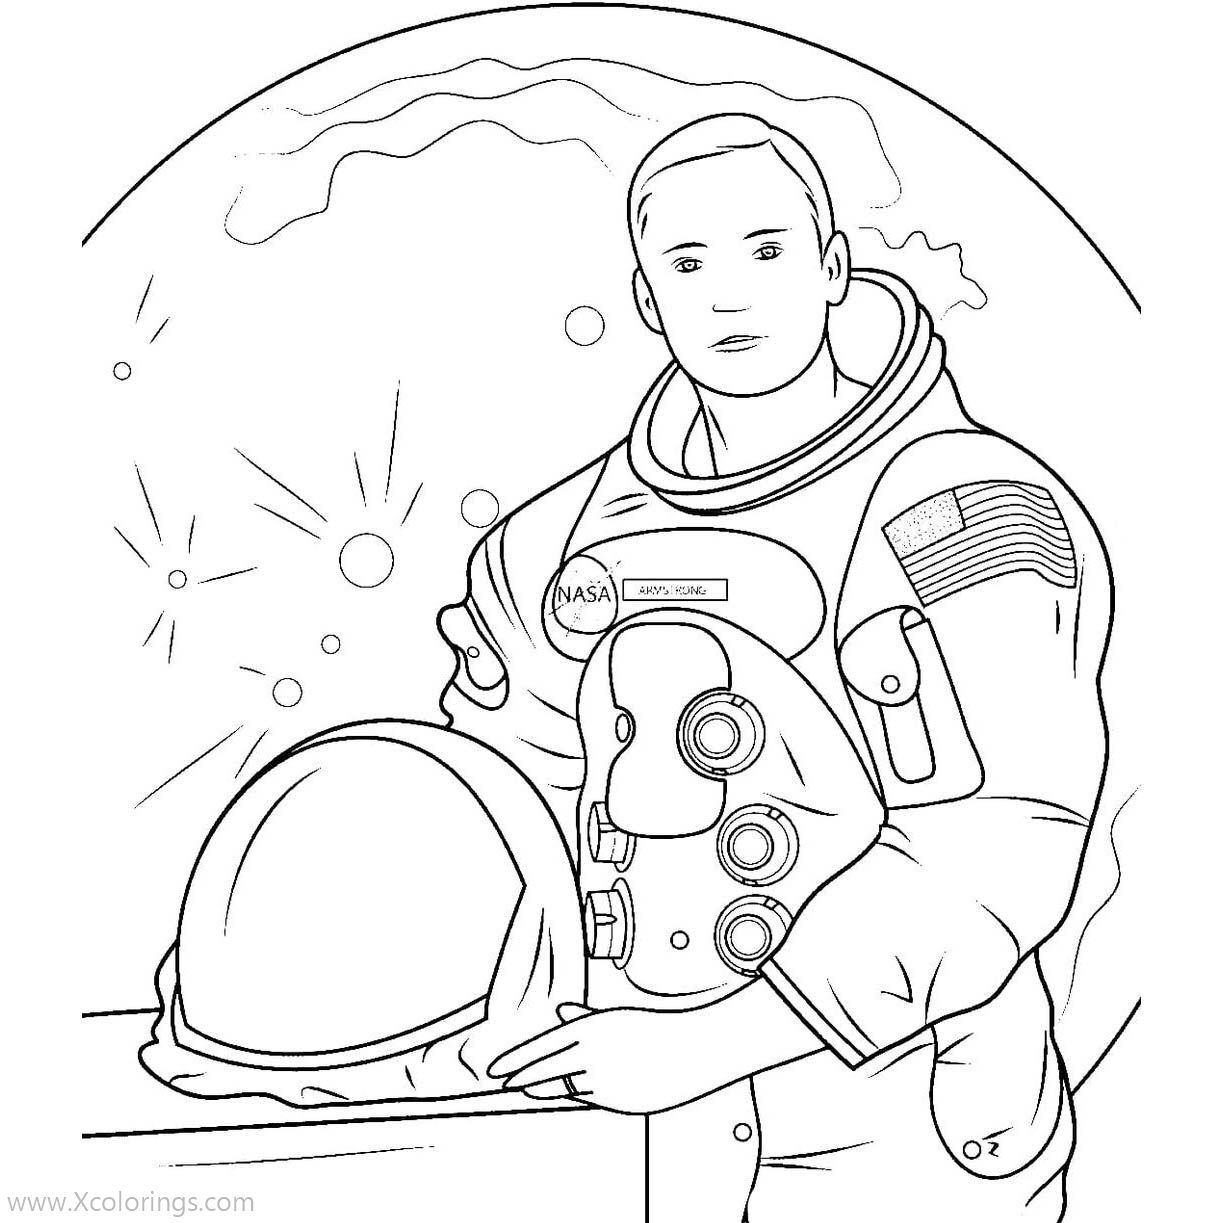 Free NASA Astronaut Coloring Pages printable